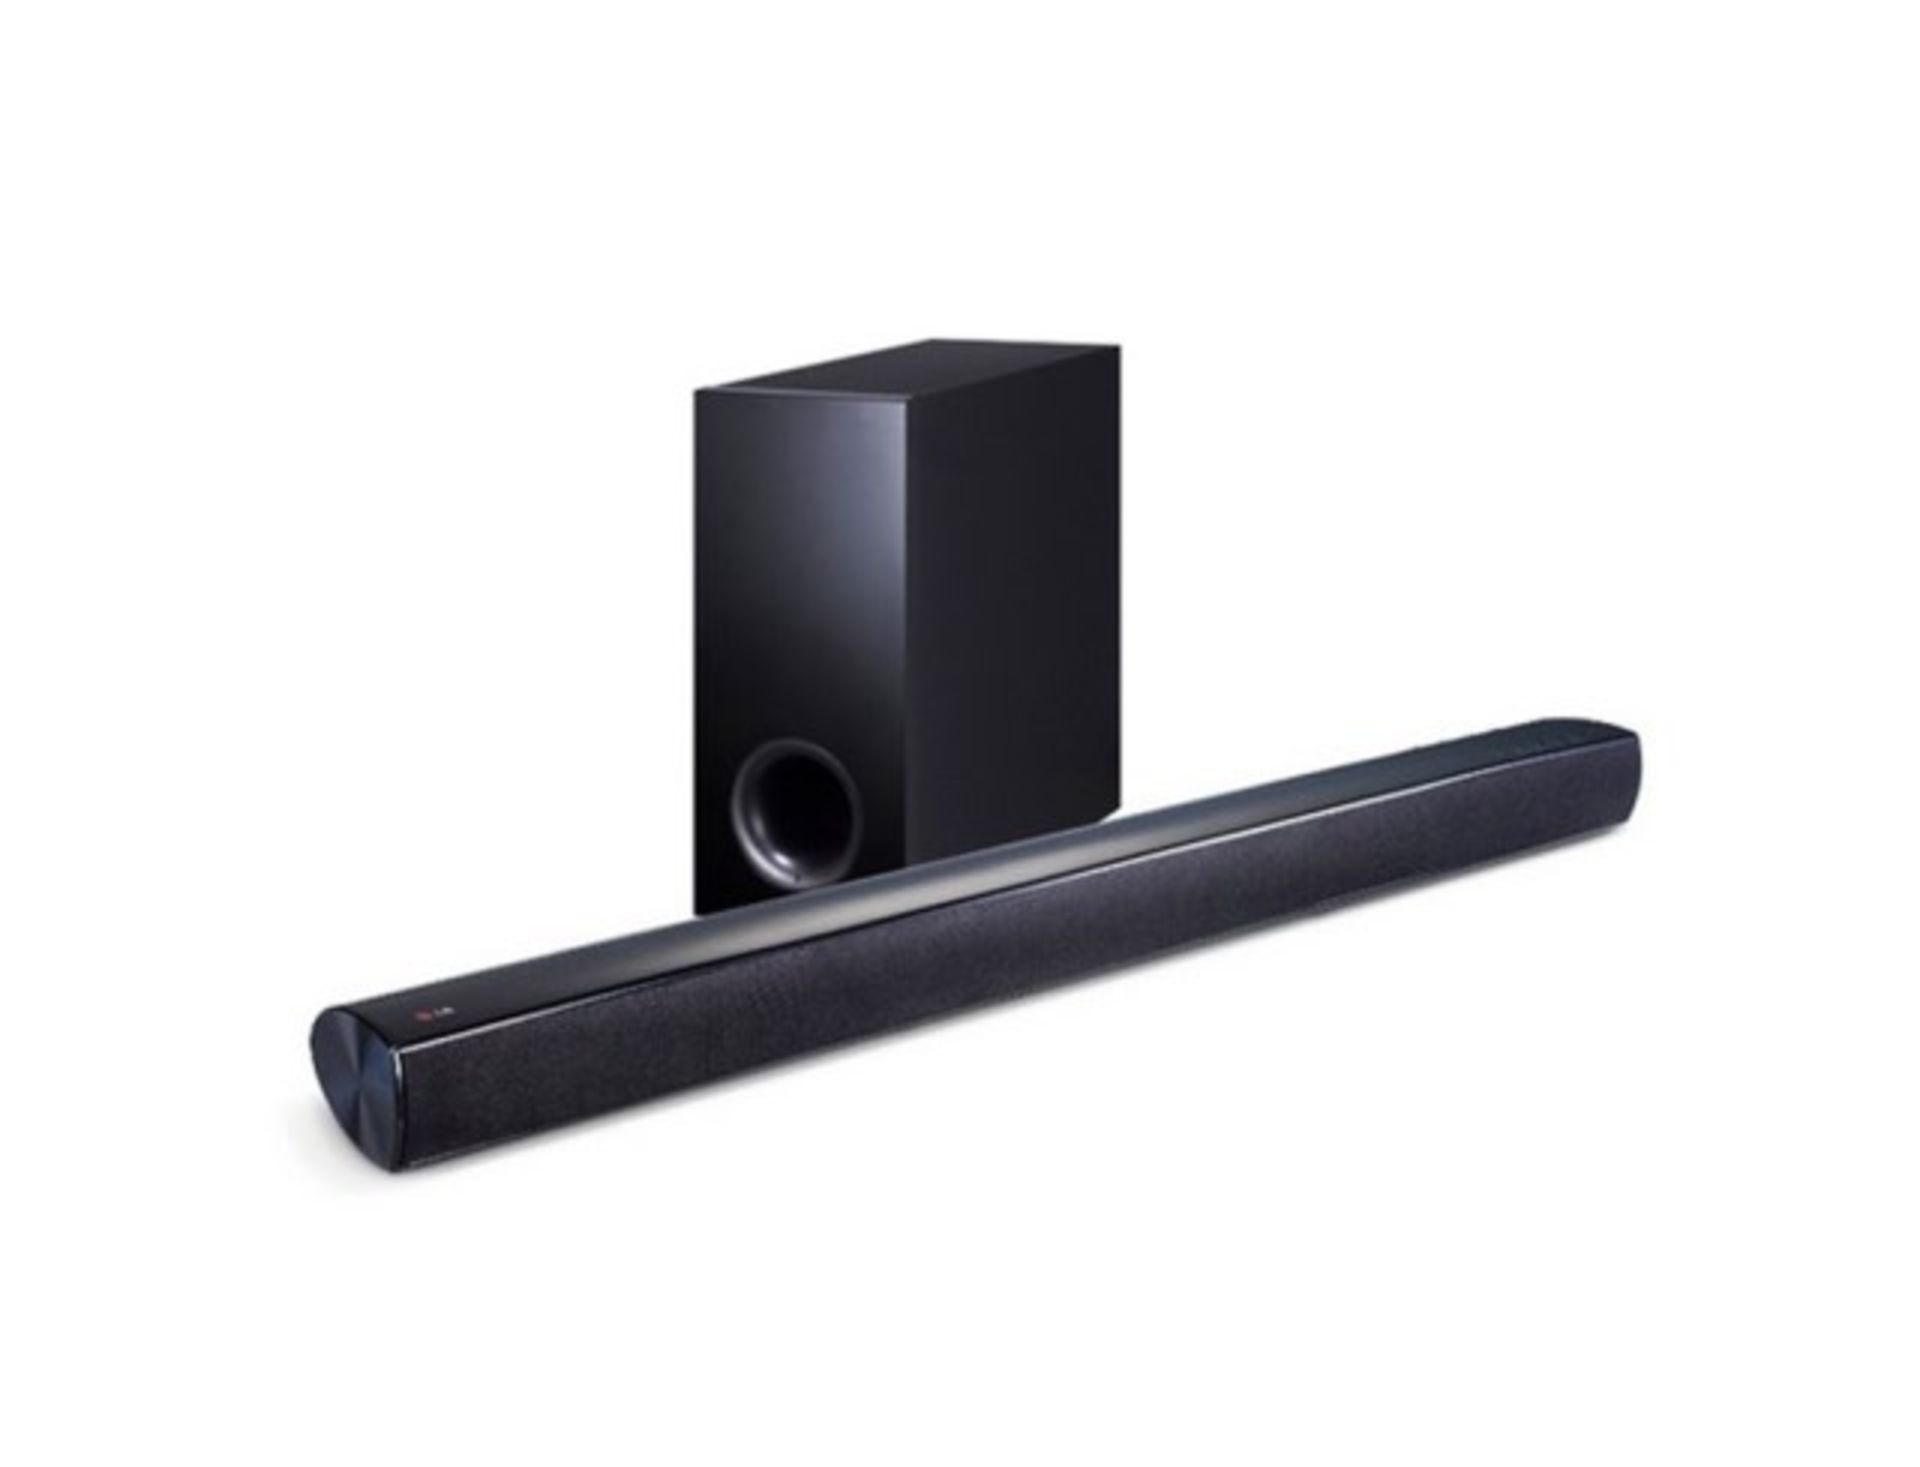 V Brand New LG 2.1 Channel Soundbar with Wired Subwoofer 120W